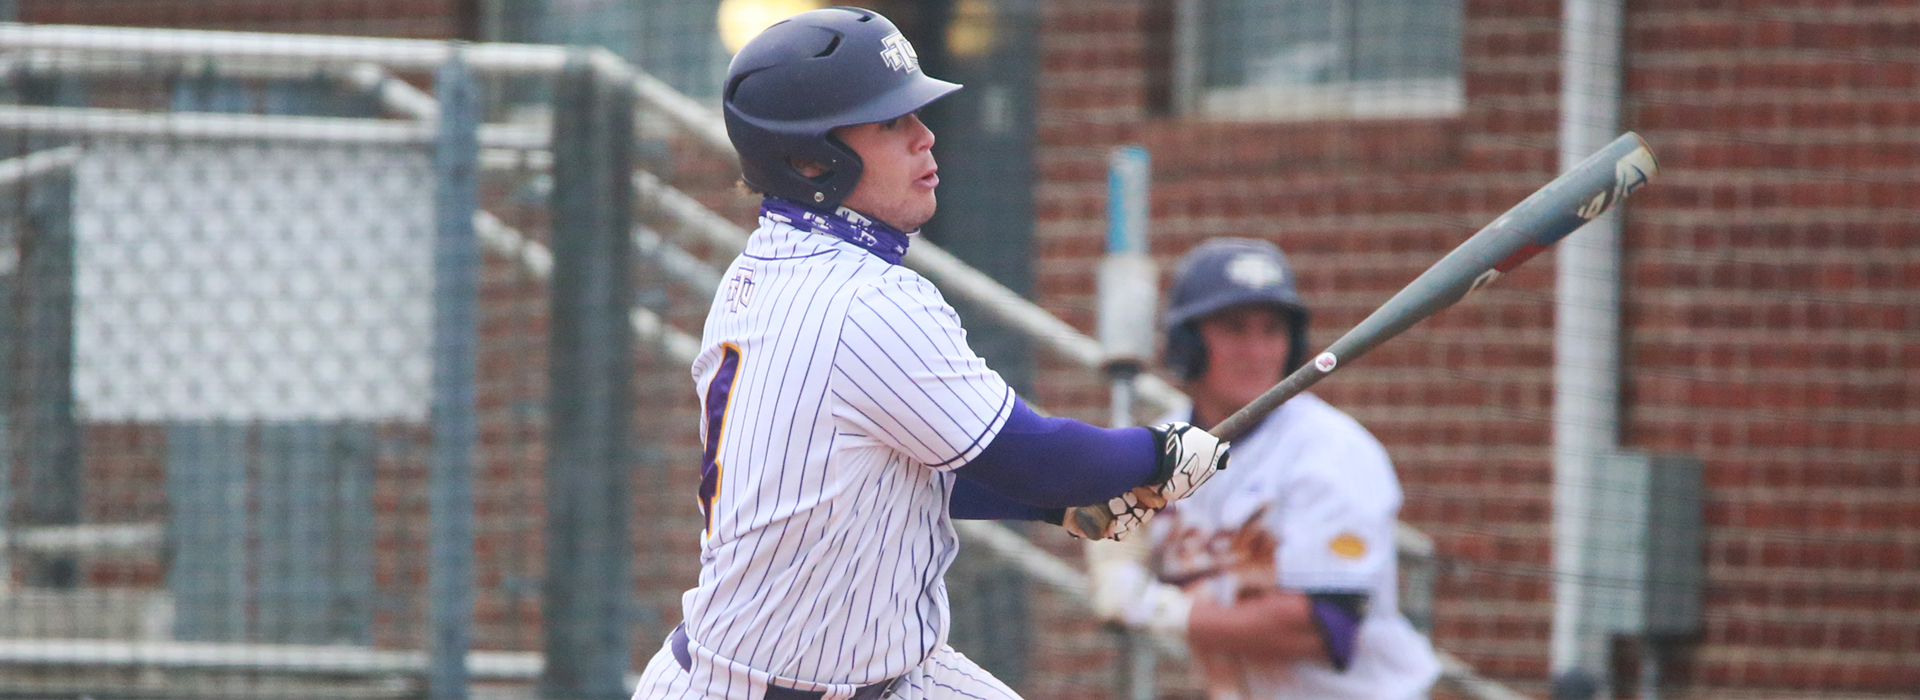 Golden Eagles return to OVC action with weekend series at Jacksonville State